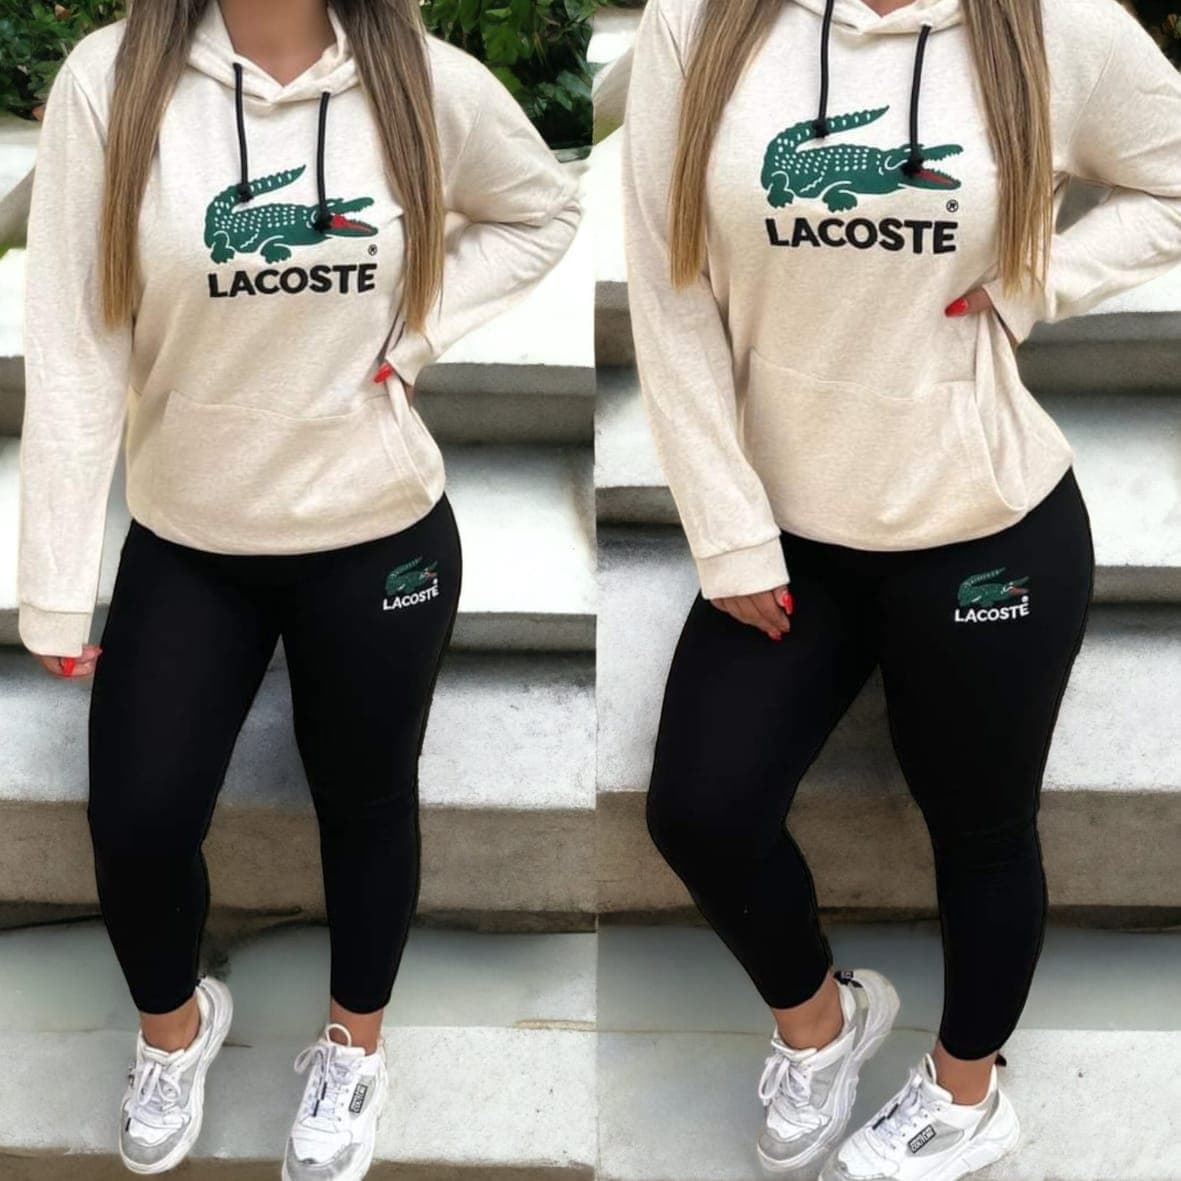 Chándal Lacoste mujer - Imagen 2